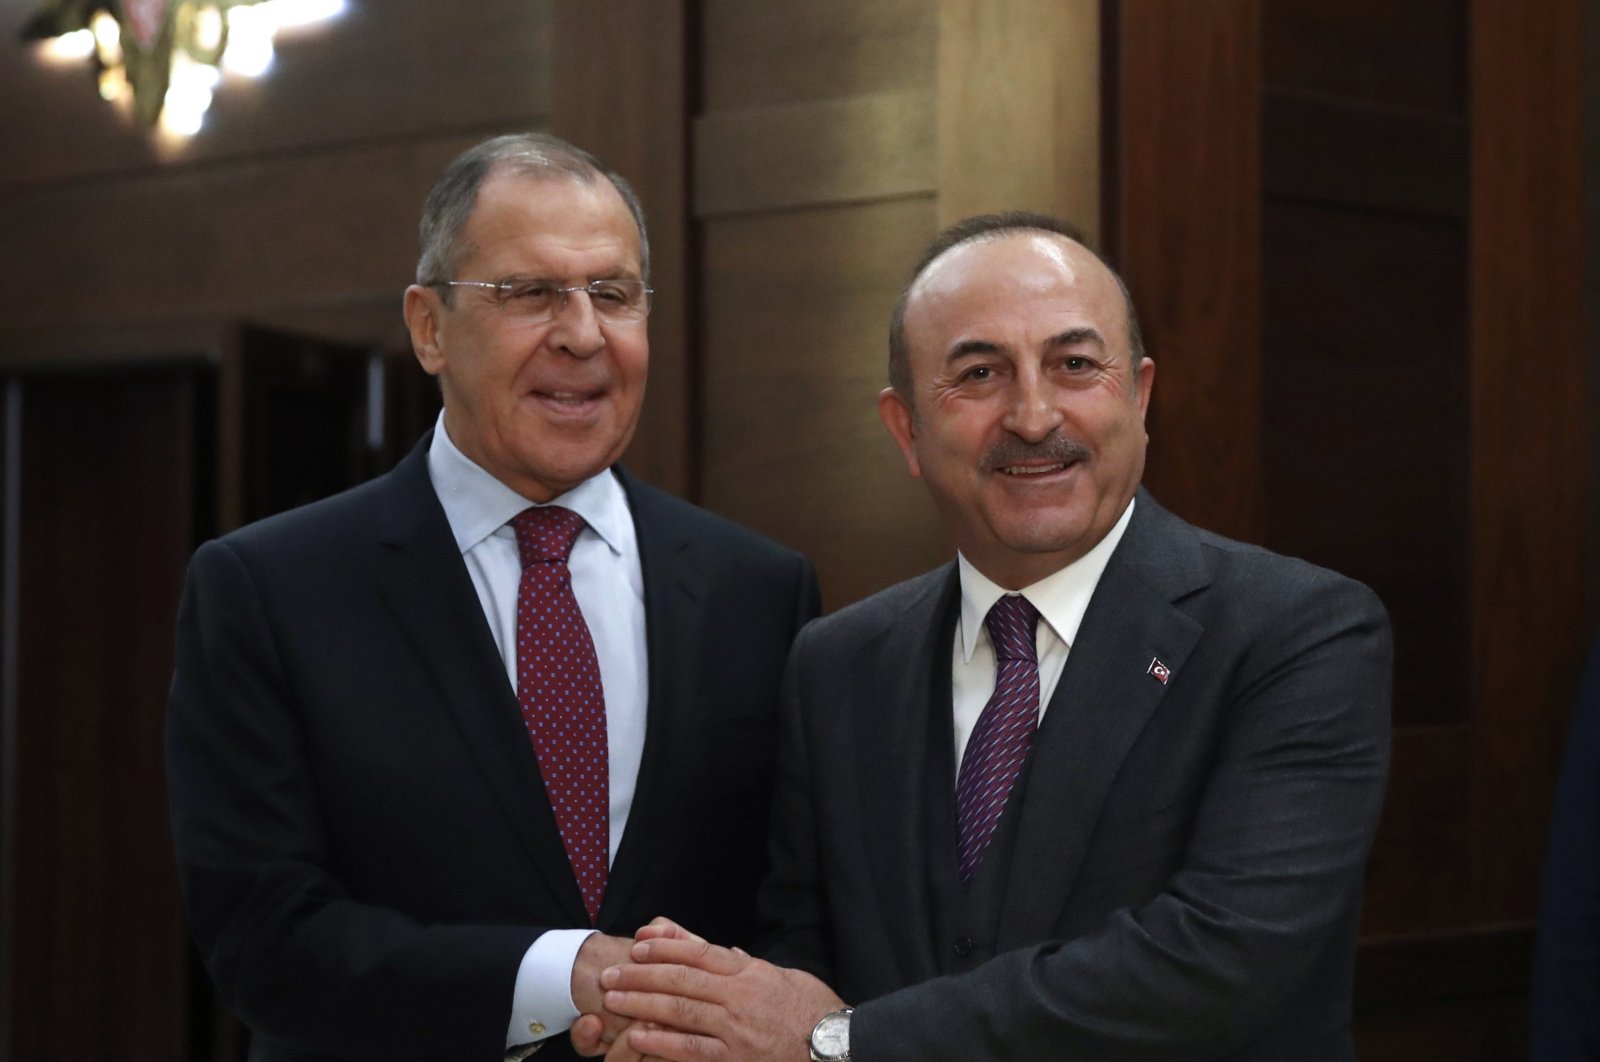 Russian Foreign Minister Sergey Lavrov (L) and Turkish Foreign Minister Mevlüt Çavuşoğlu pose after a press conference in Moscow, Russia, Dec. 30, 2018. (AA Photo)